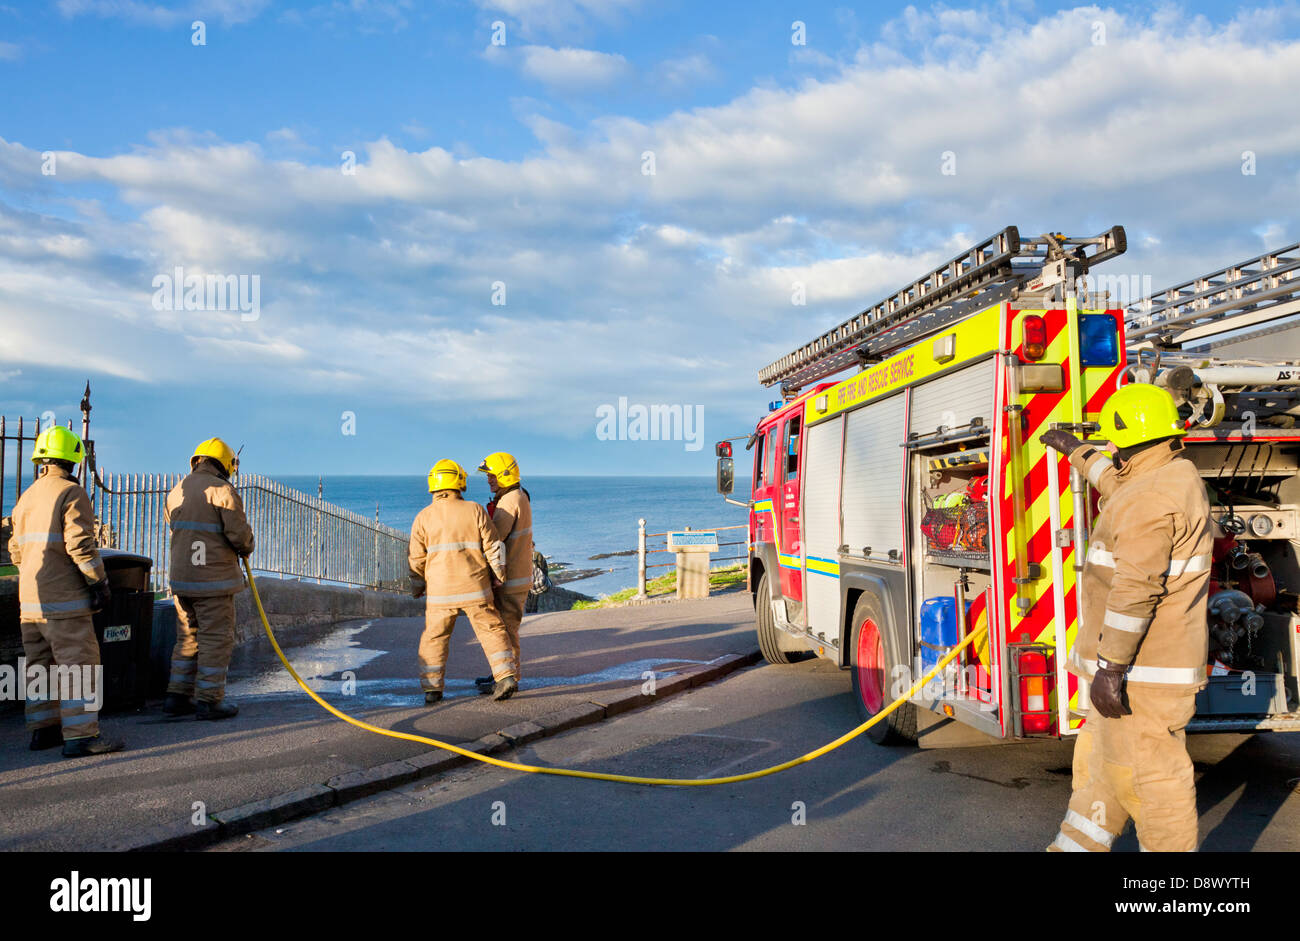 Firemen putting out a small fire in a litter bin at the seaside using a long fire hose from a fire engine Stock Photo